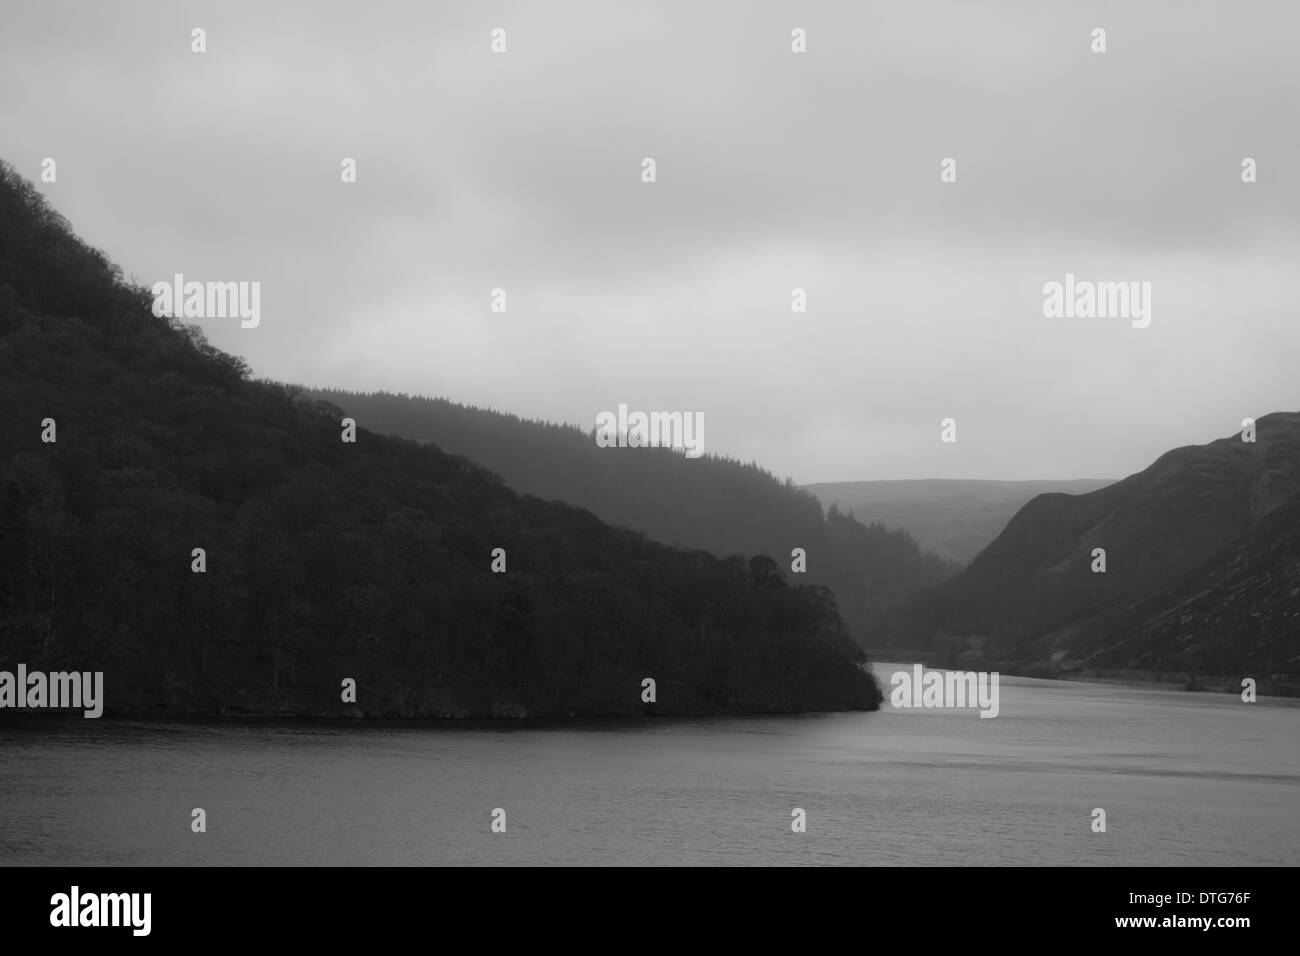 Taken in the Elan Valley in Mid Wales, a landscape made up of different shades Stock Photo